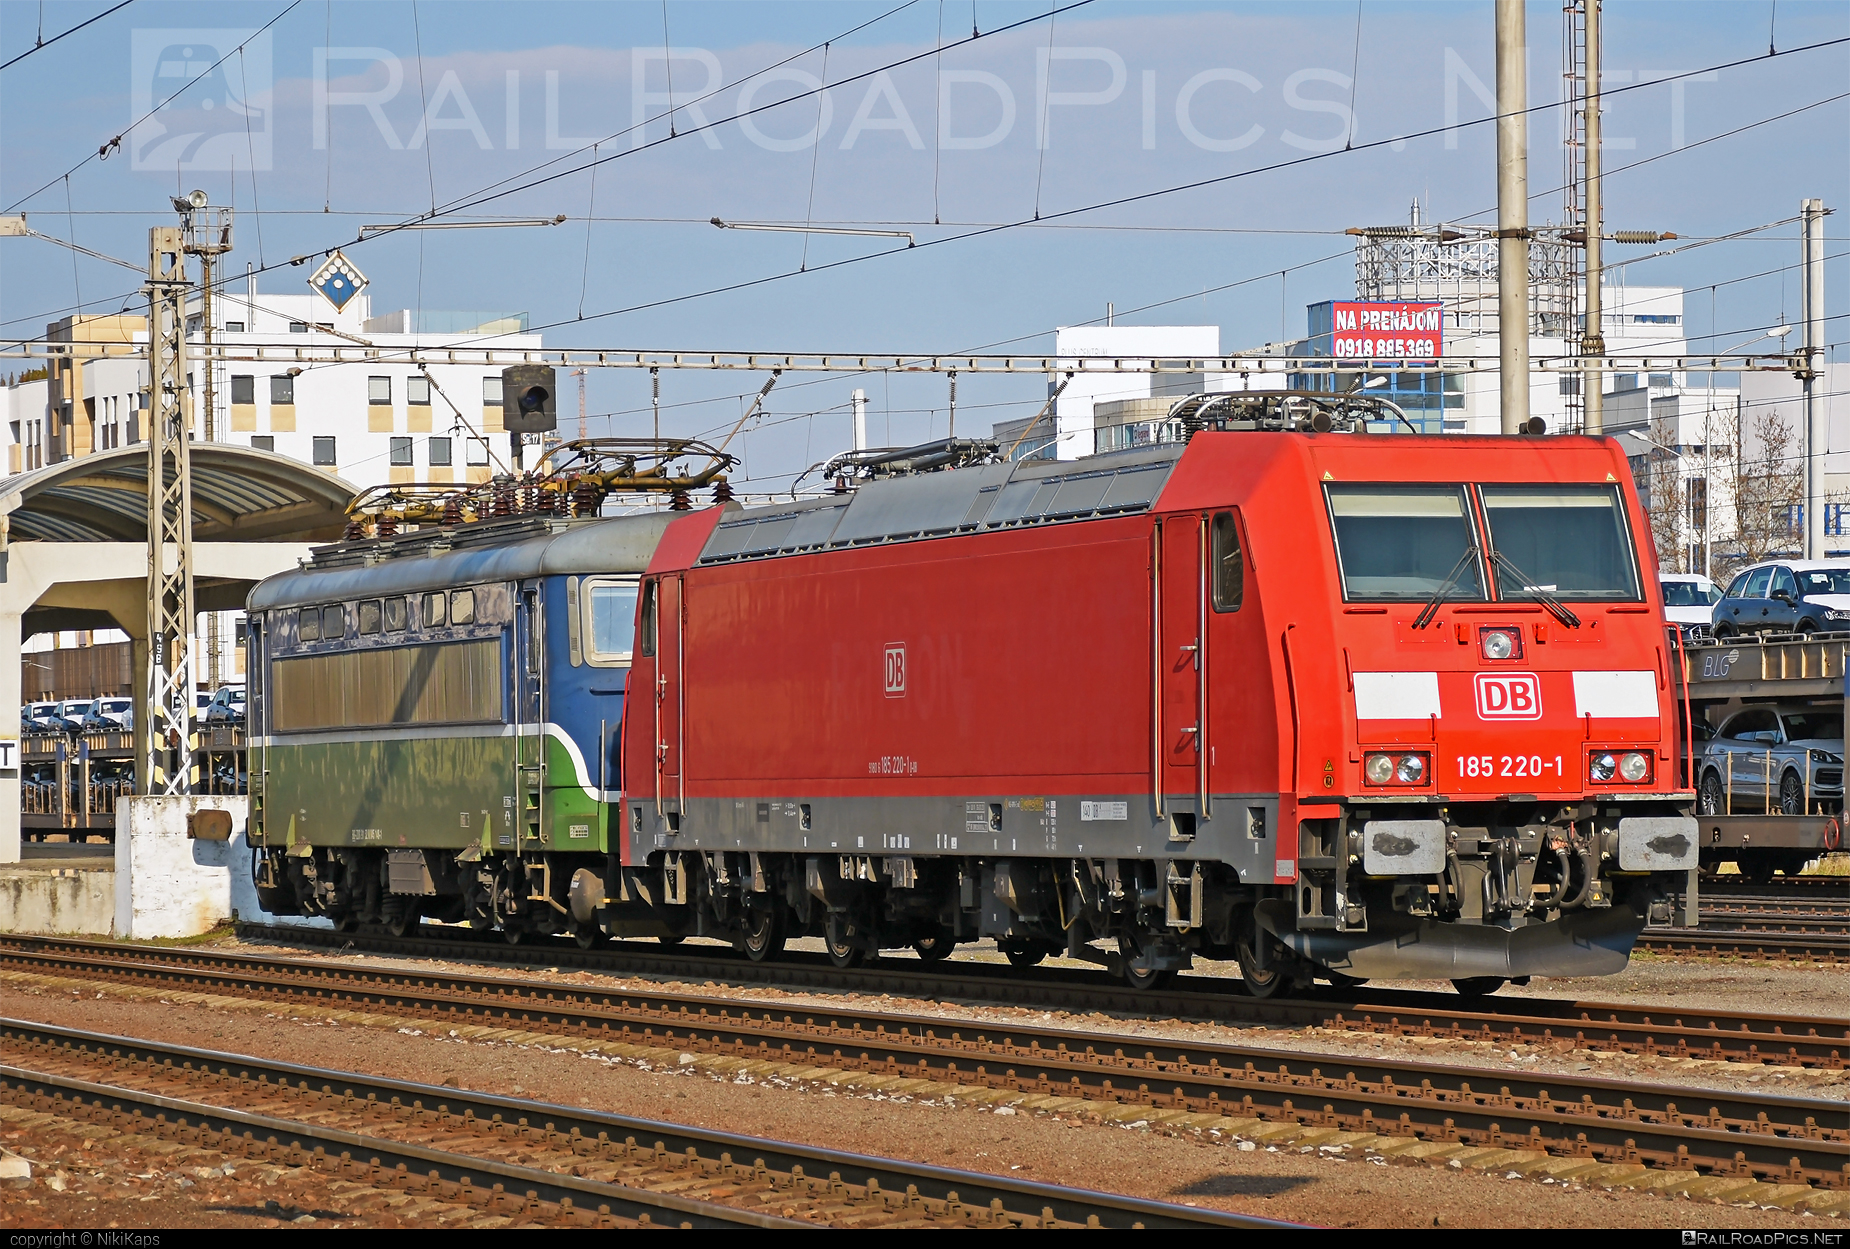 Bombardier TRAXX F140 AC2 - 185 220-1 operated by DB Cargo AG #bombardier #bombardiertraxx #db #dbcargo #dbcargoag #deutschebahn #traxx #traxxf140 #traxxf140ac #traxxf140ac2